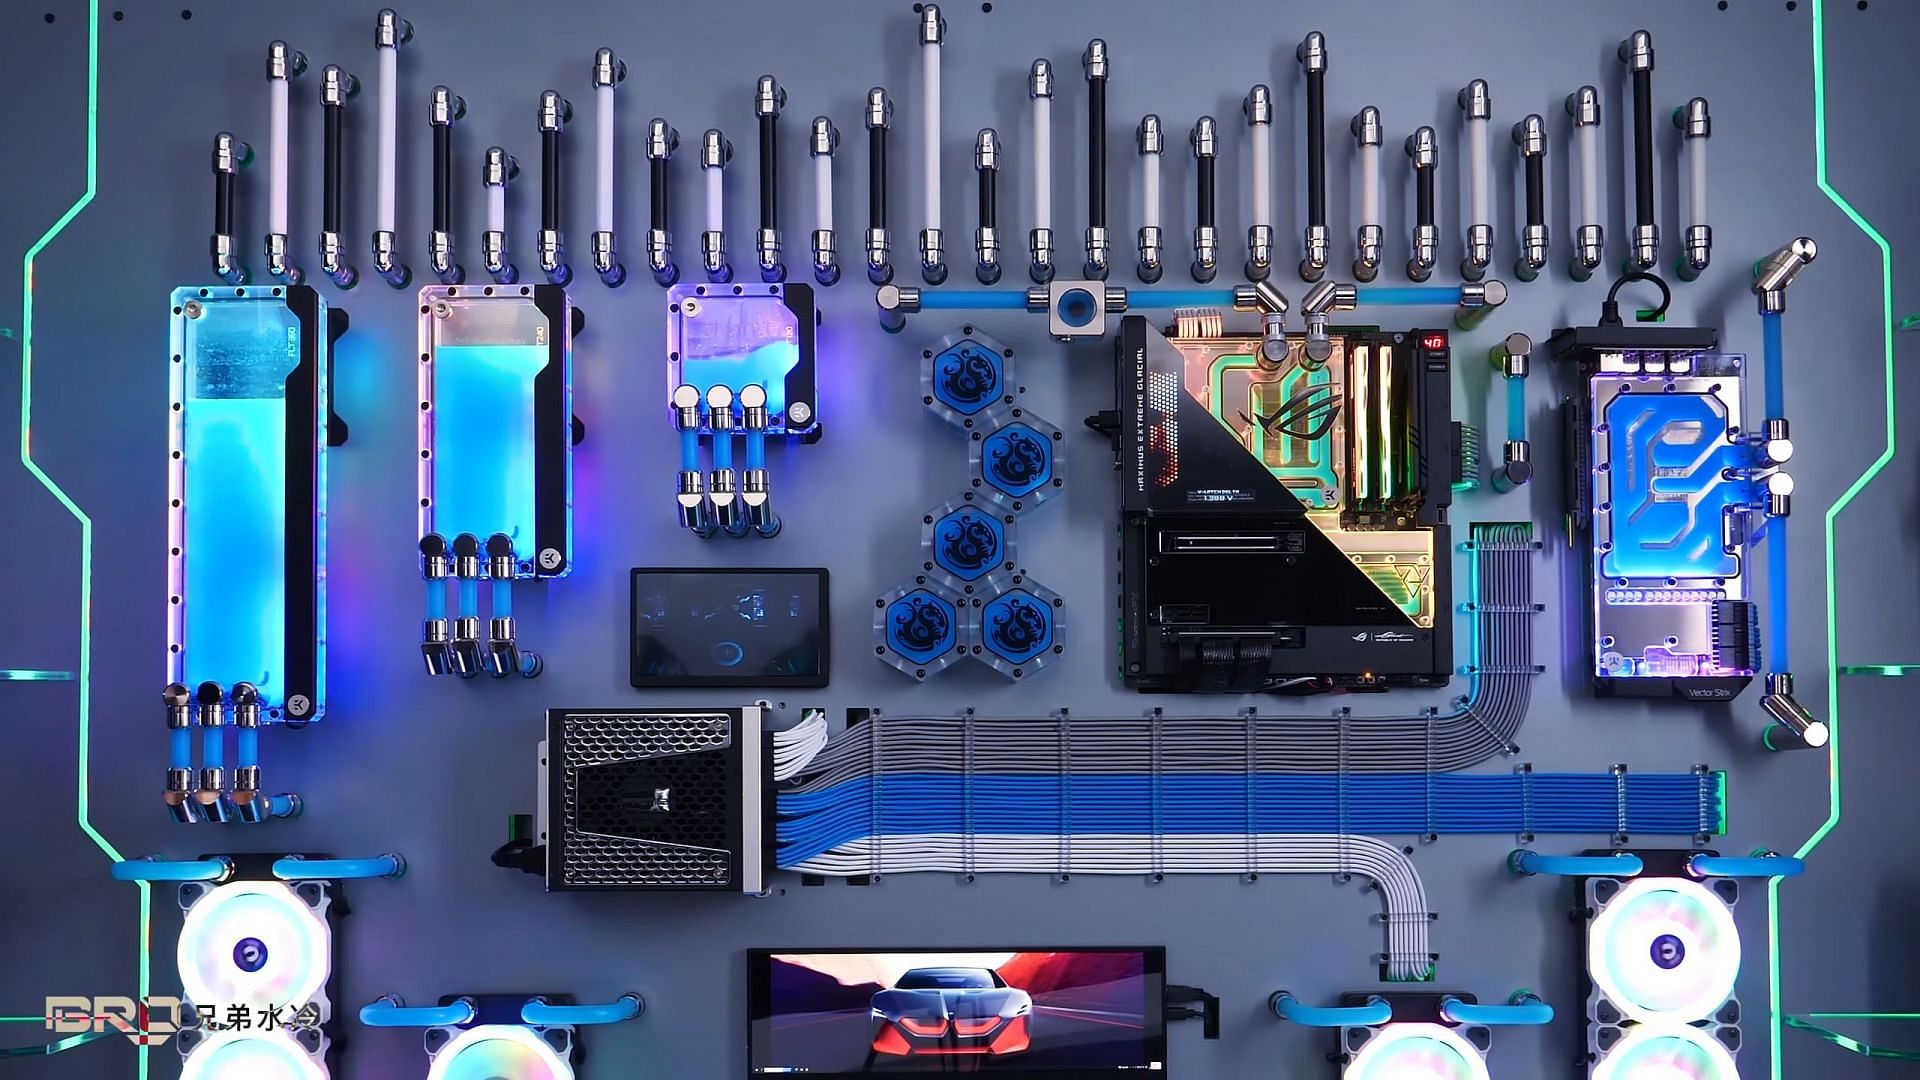 Custom gaming PC openly attached to the wall (Image via YouTube/Bro Cooling)